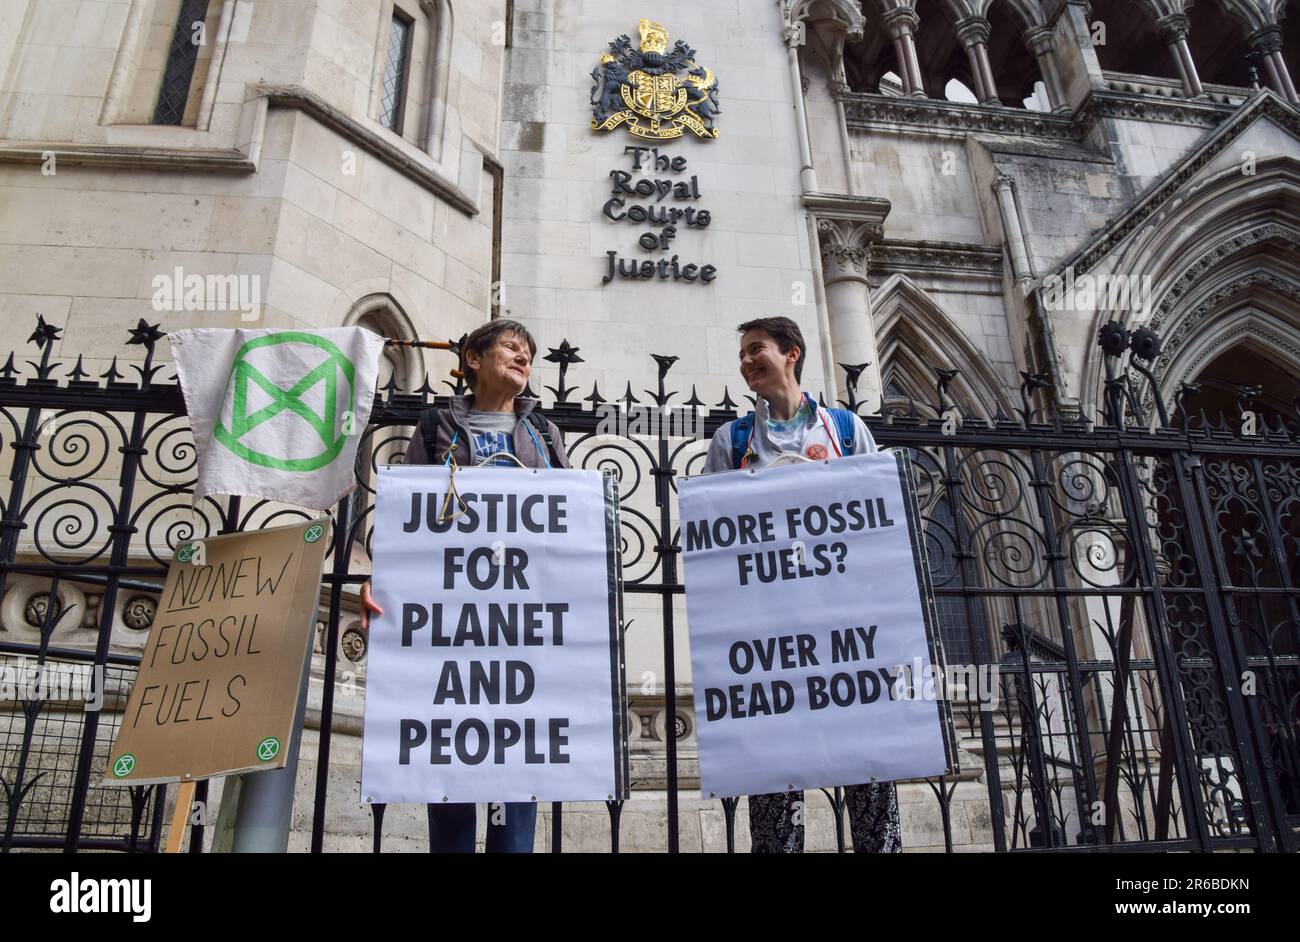 Protesters hold anti-fossil fuels placards during the demonstration. Climate protesters gathered outside the Royal Courts of Justice during the judicial review of the planning permission for UK Oil And Gas to explore for fossil fuels near the village of Dunsfold. (Photo by Vuk Valcic / SOPA Images/Sipa USA) Stock Photo